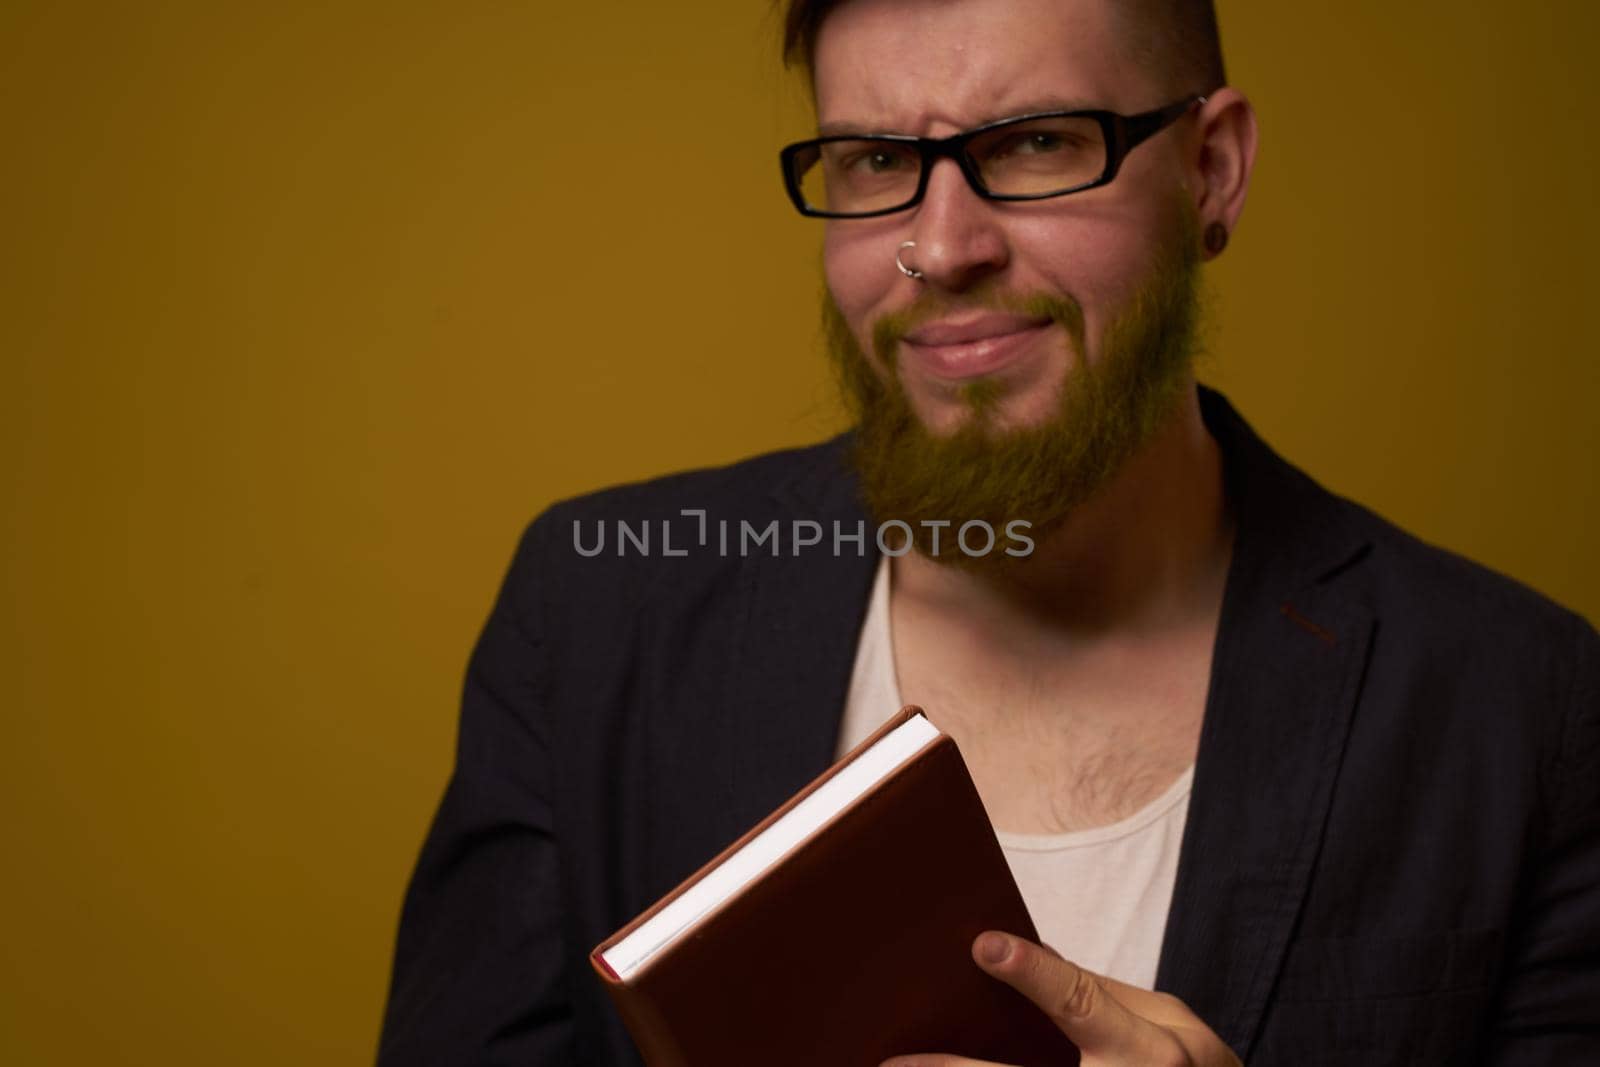 bearded man in a black jacket with a book in his hands education by Vichizh